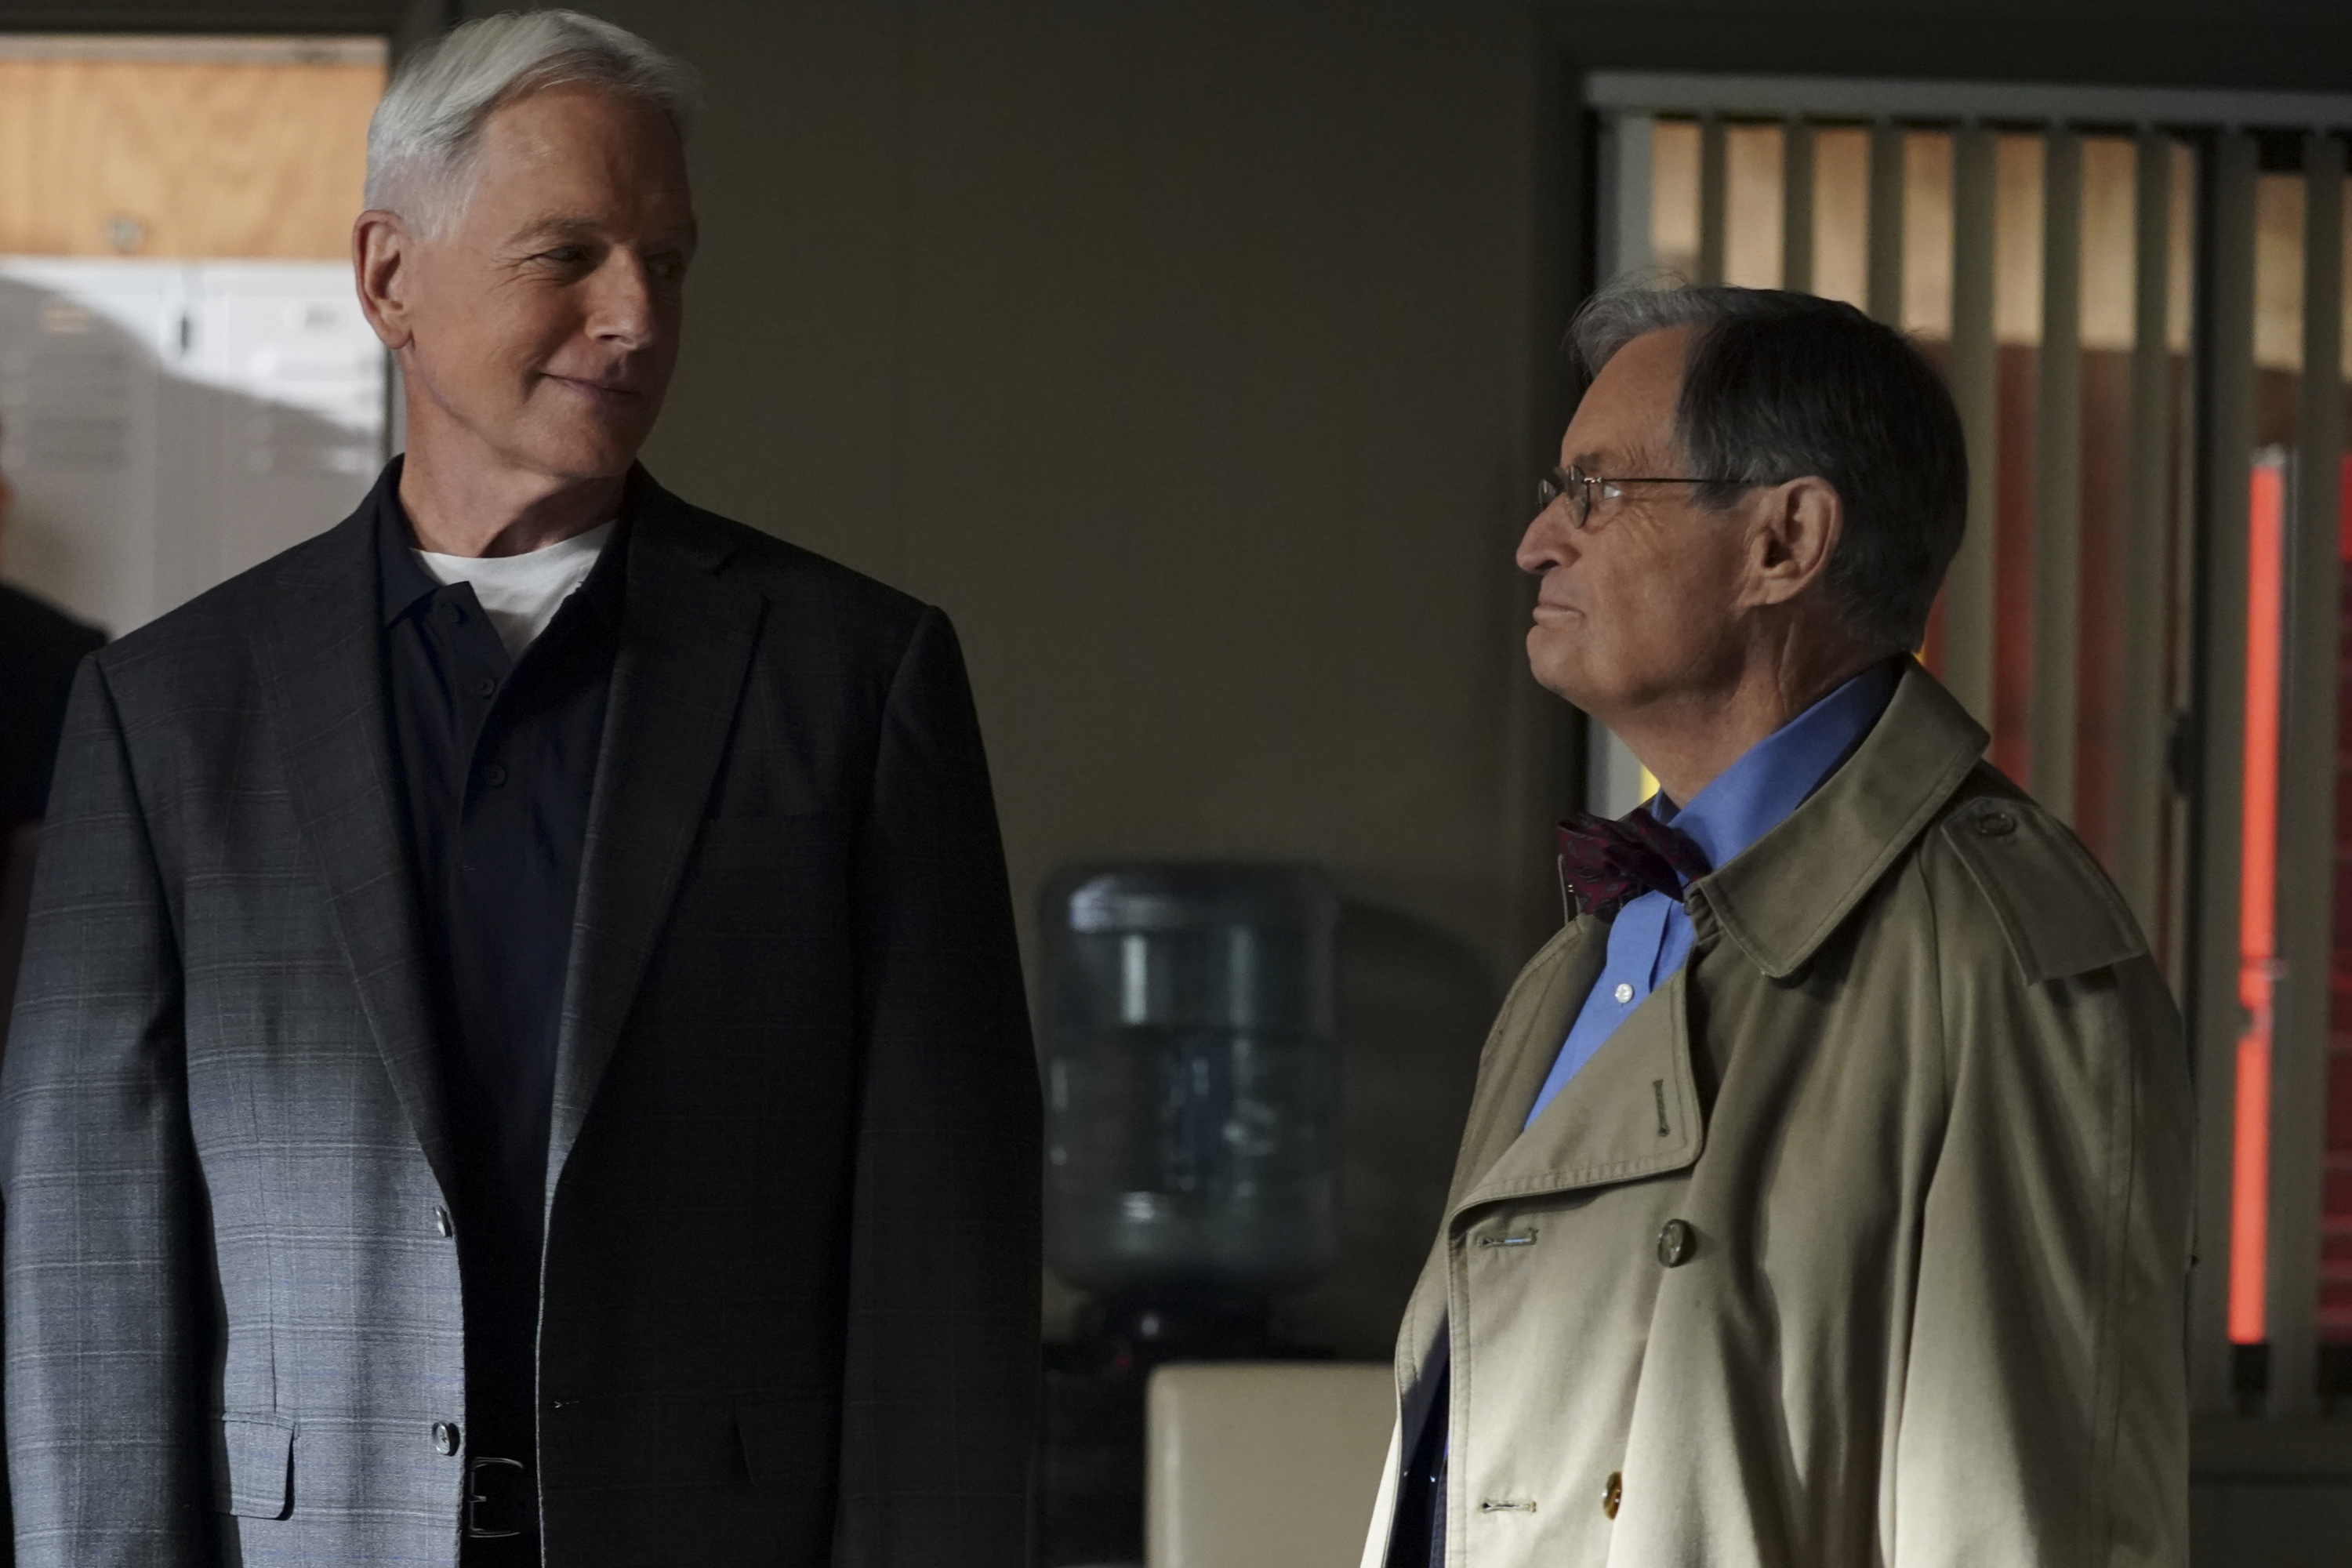 Mark Harmon and David McCallum stand next to each other during a scene from NCIS. 